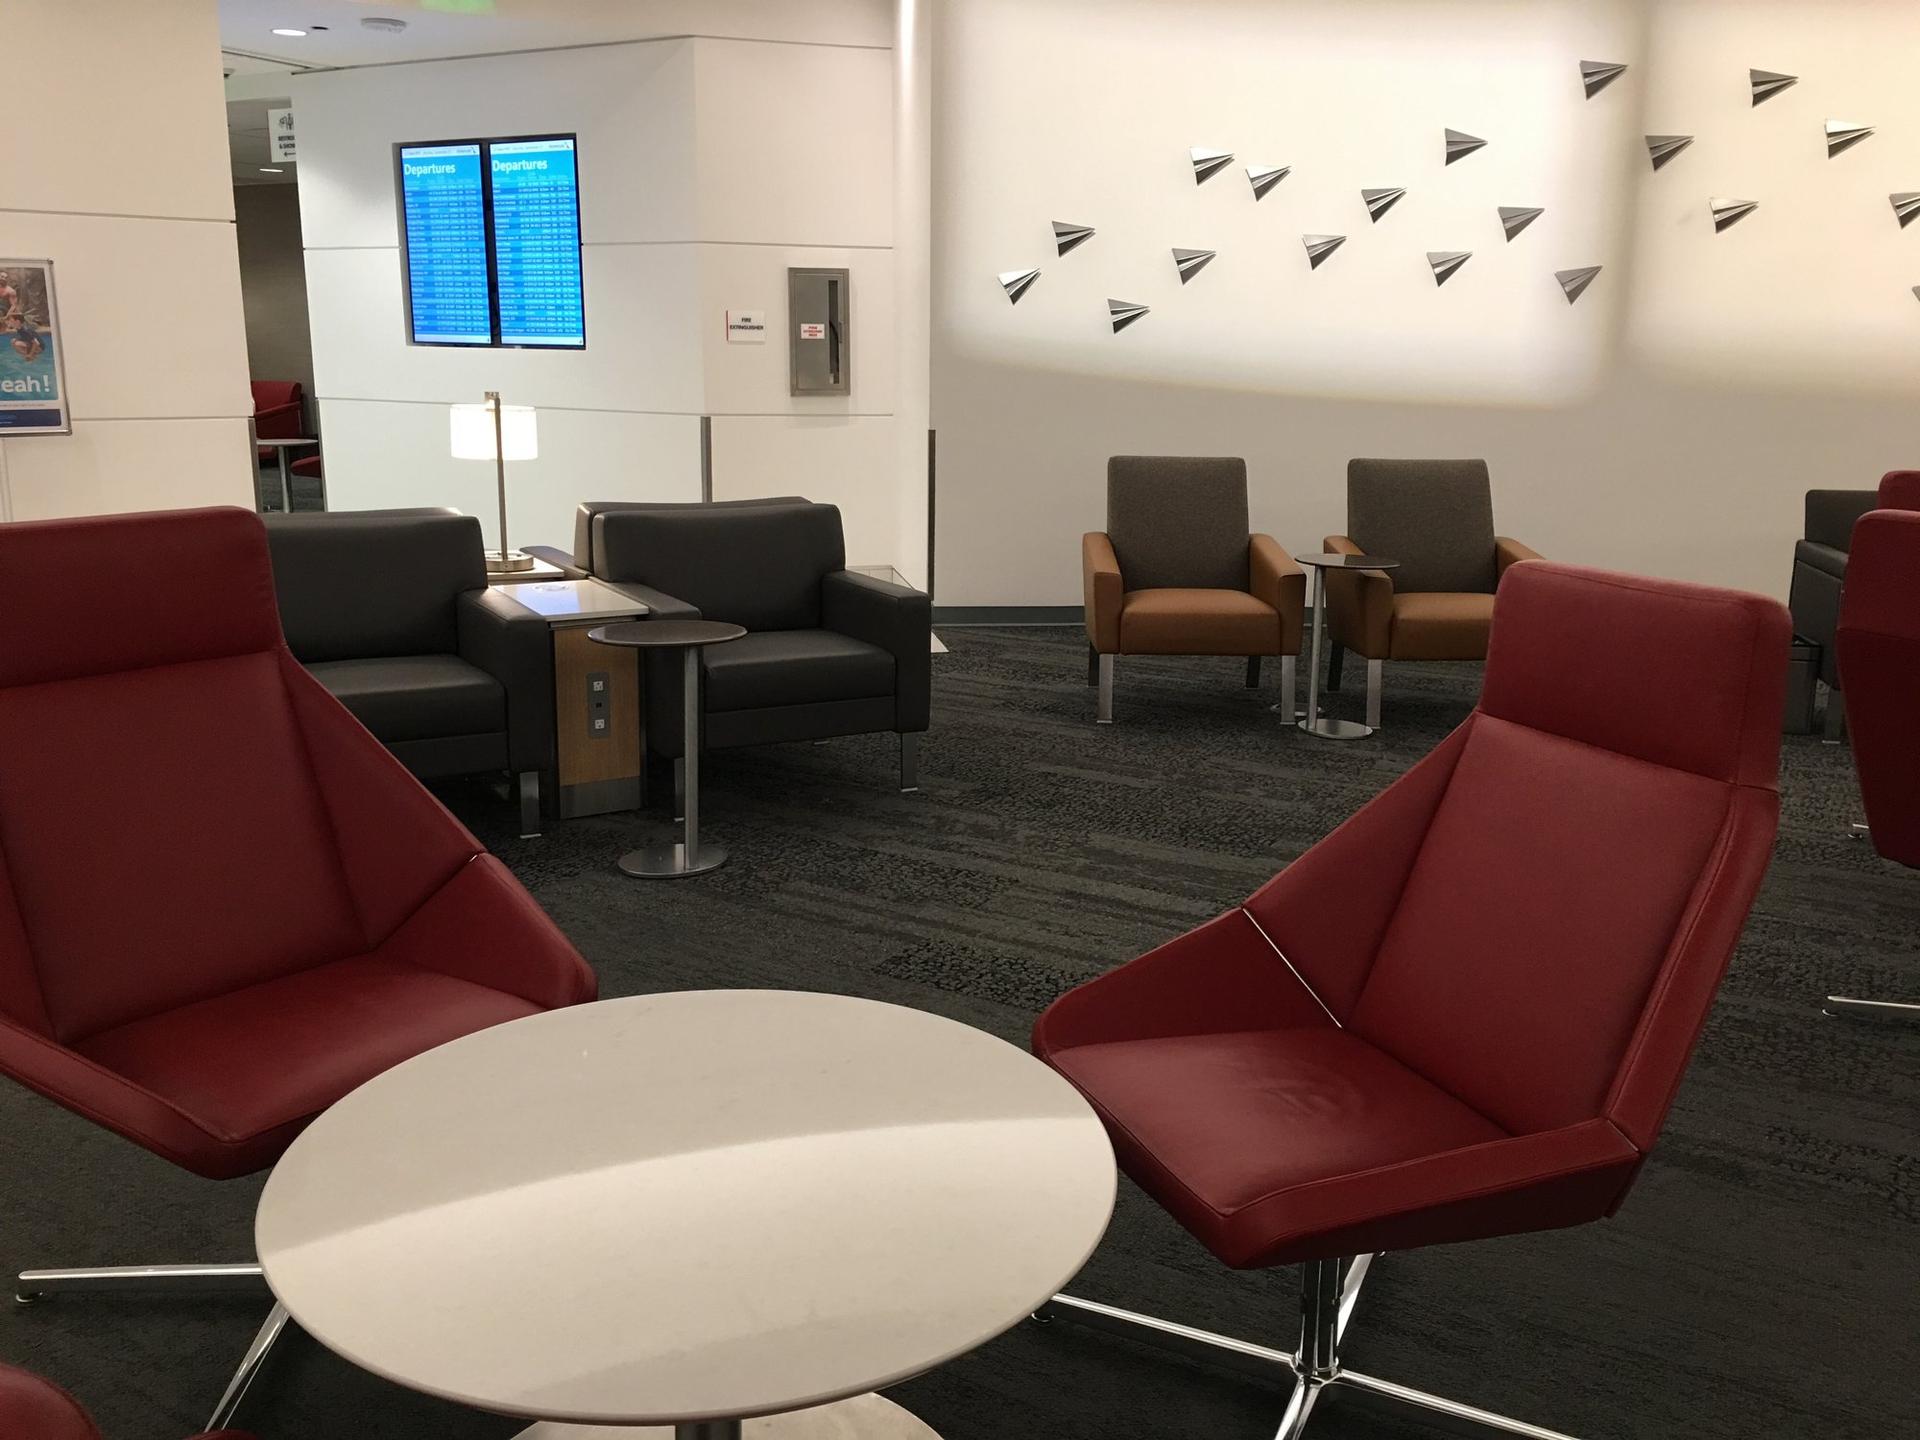 American Airlines Admirals Club image 5 of 38